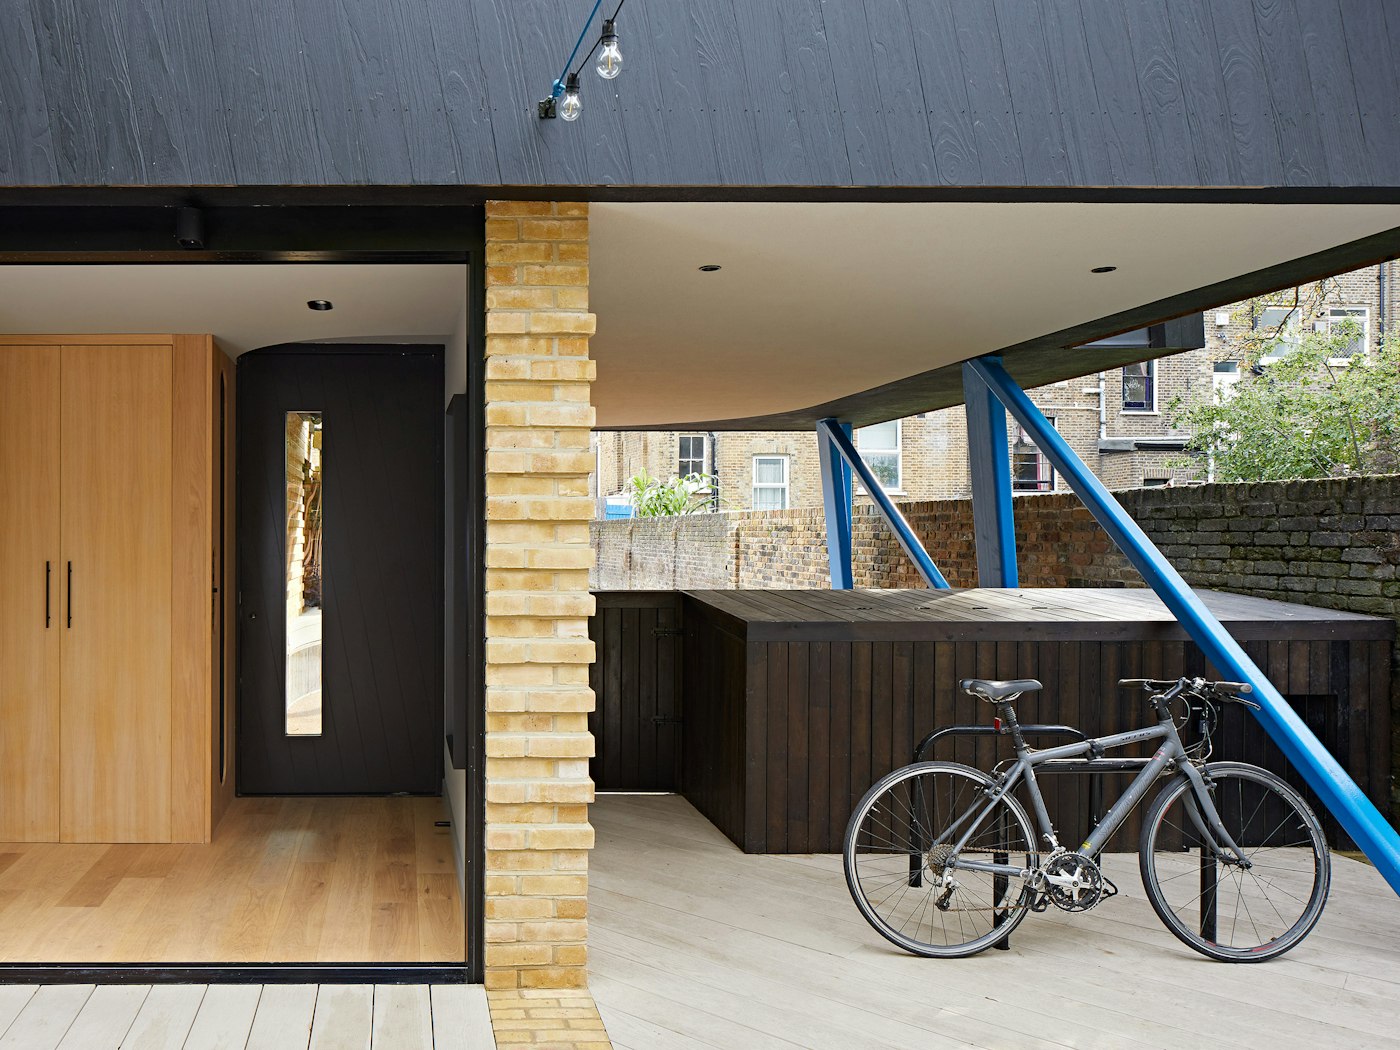 Housed within a variety of other building materials & colours, the black door & cladding offer the perfect neutral base